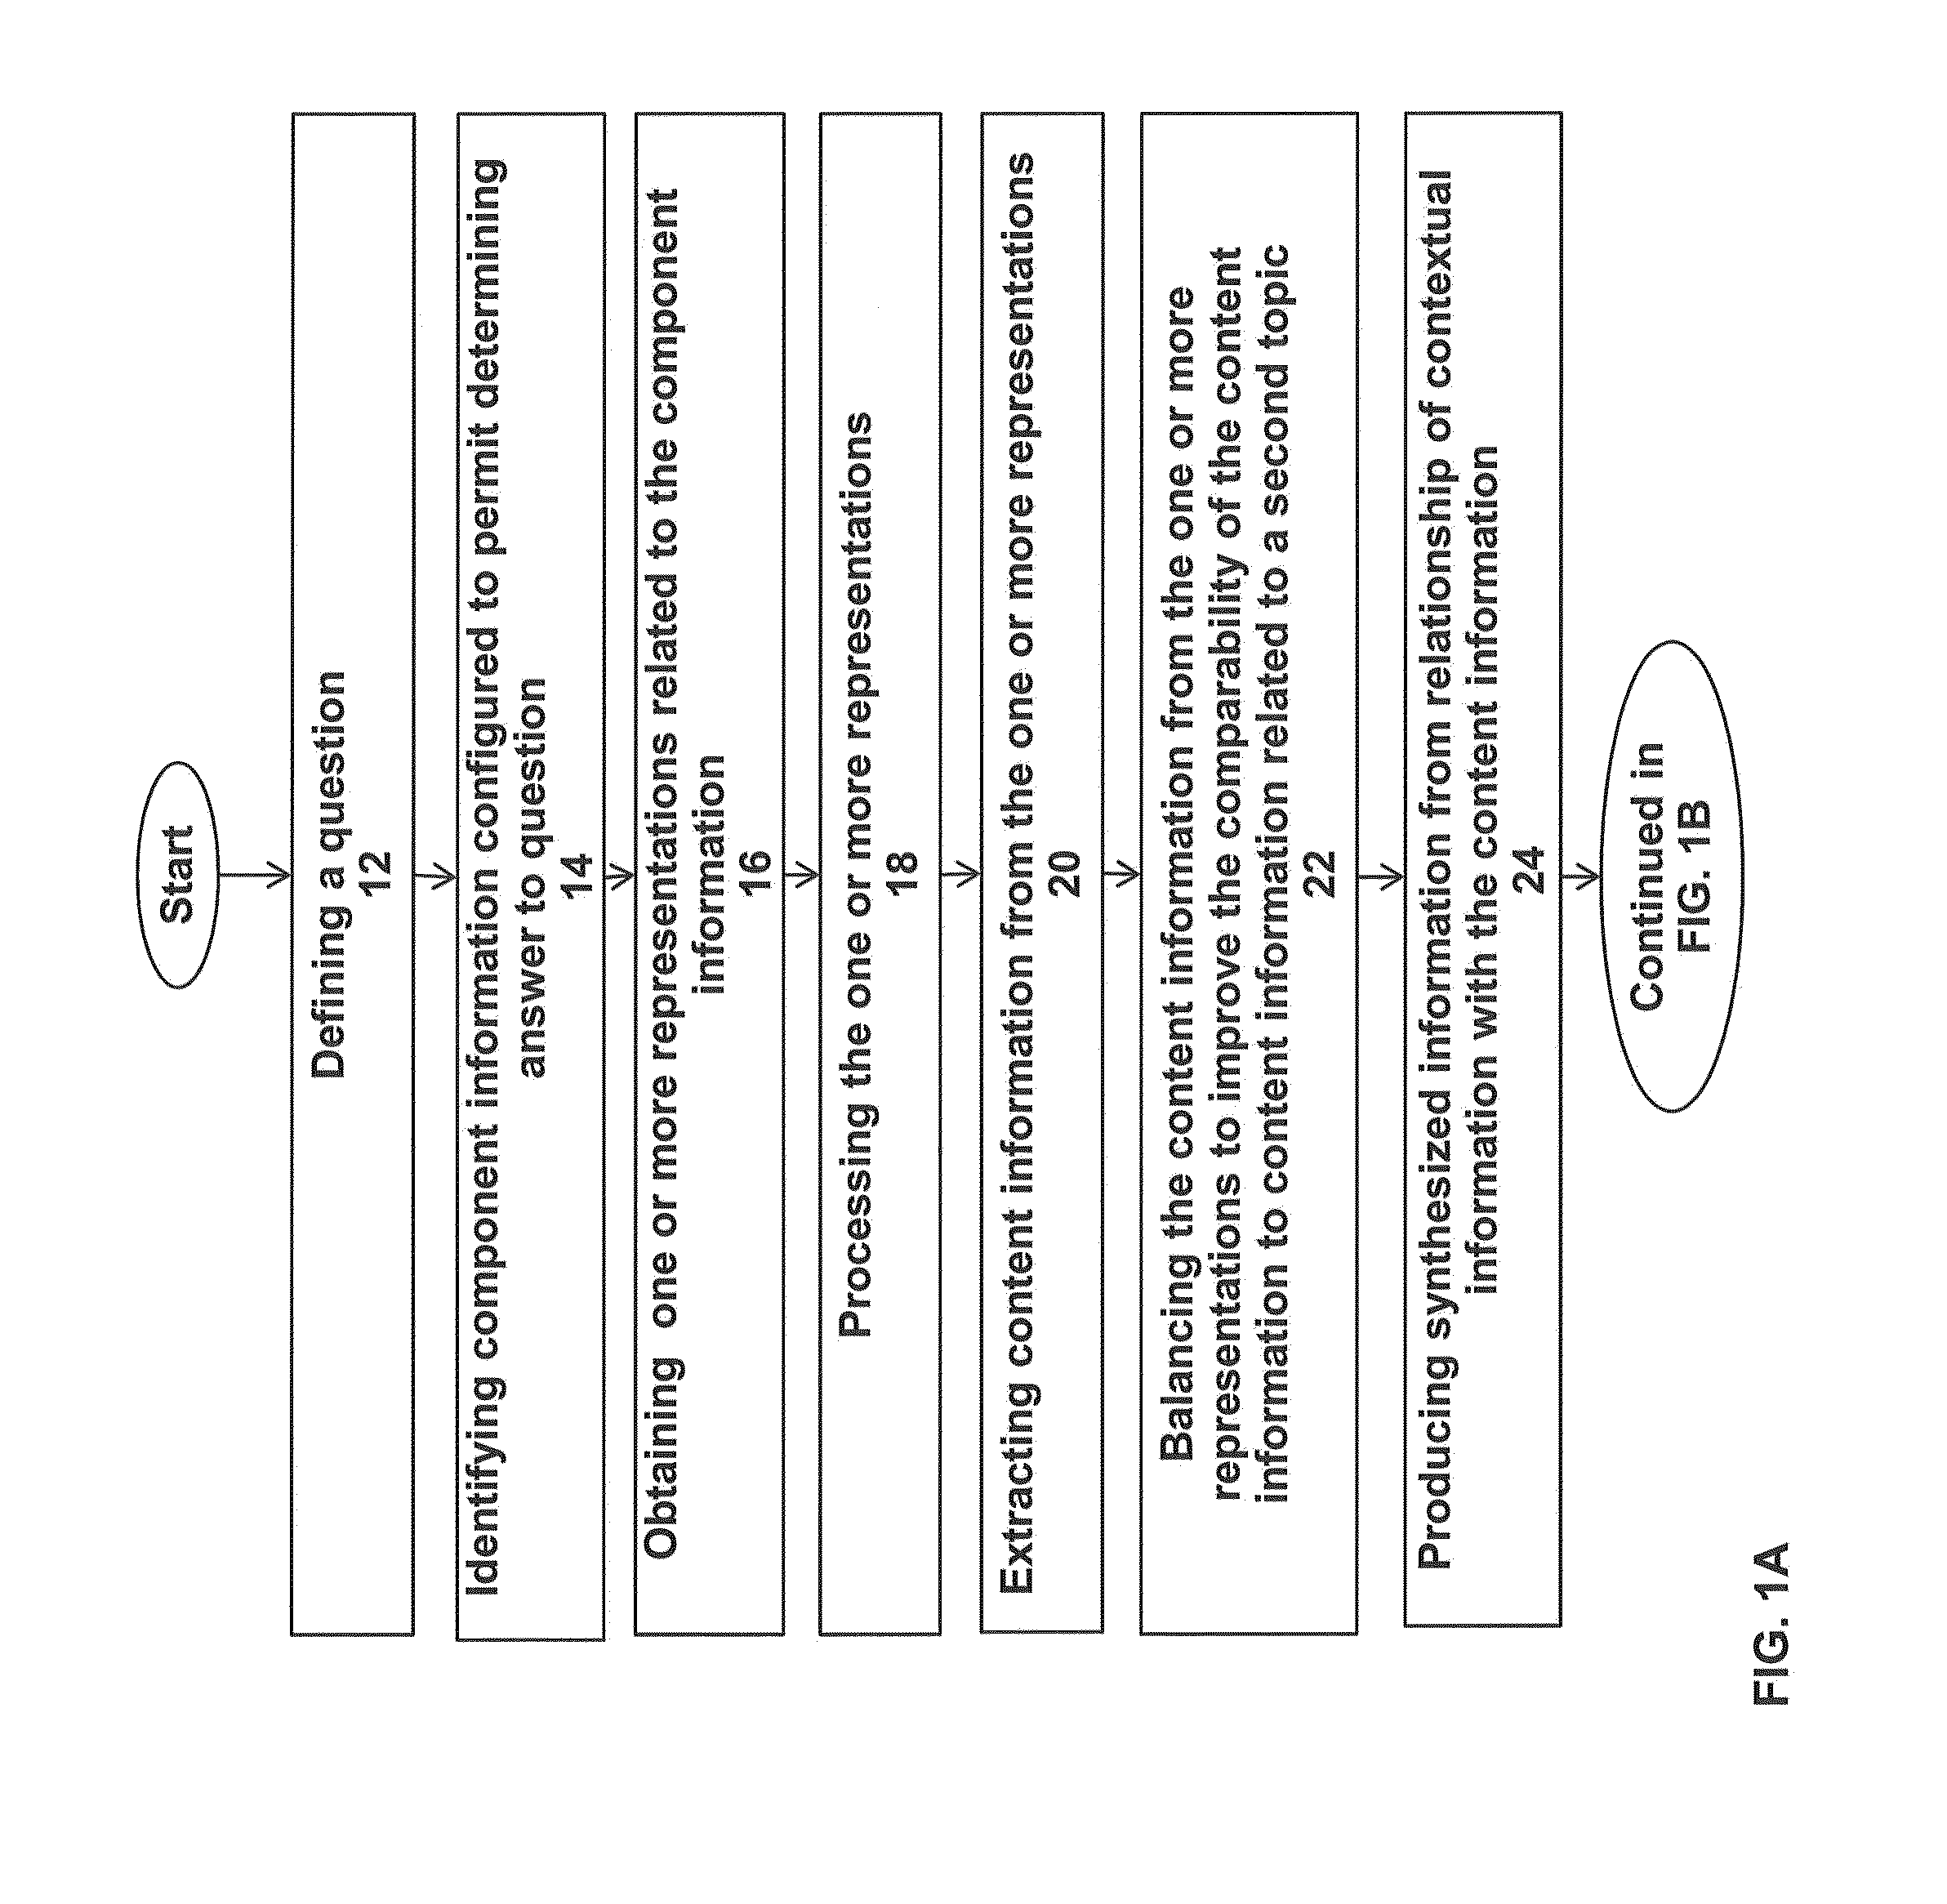 System and methods for generating quality, verified, synthesized, and coded information